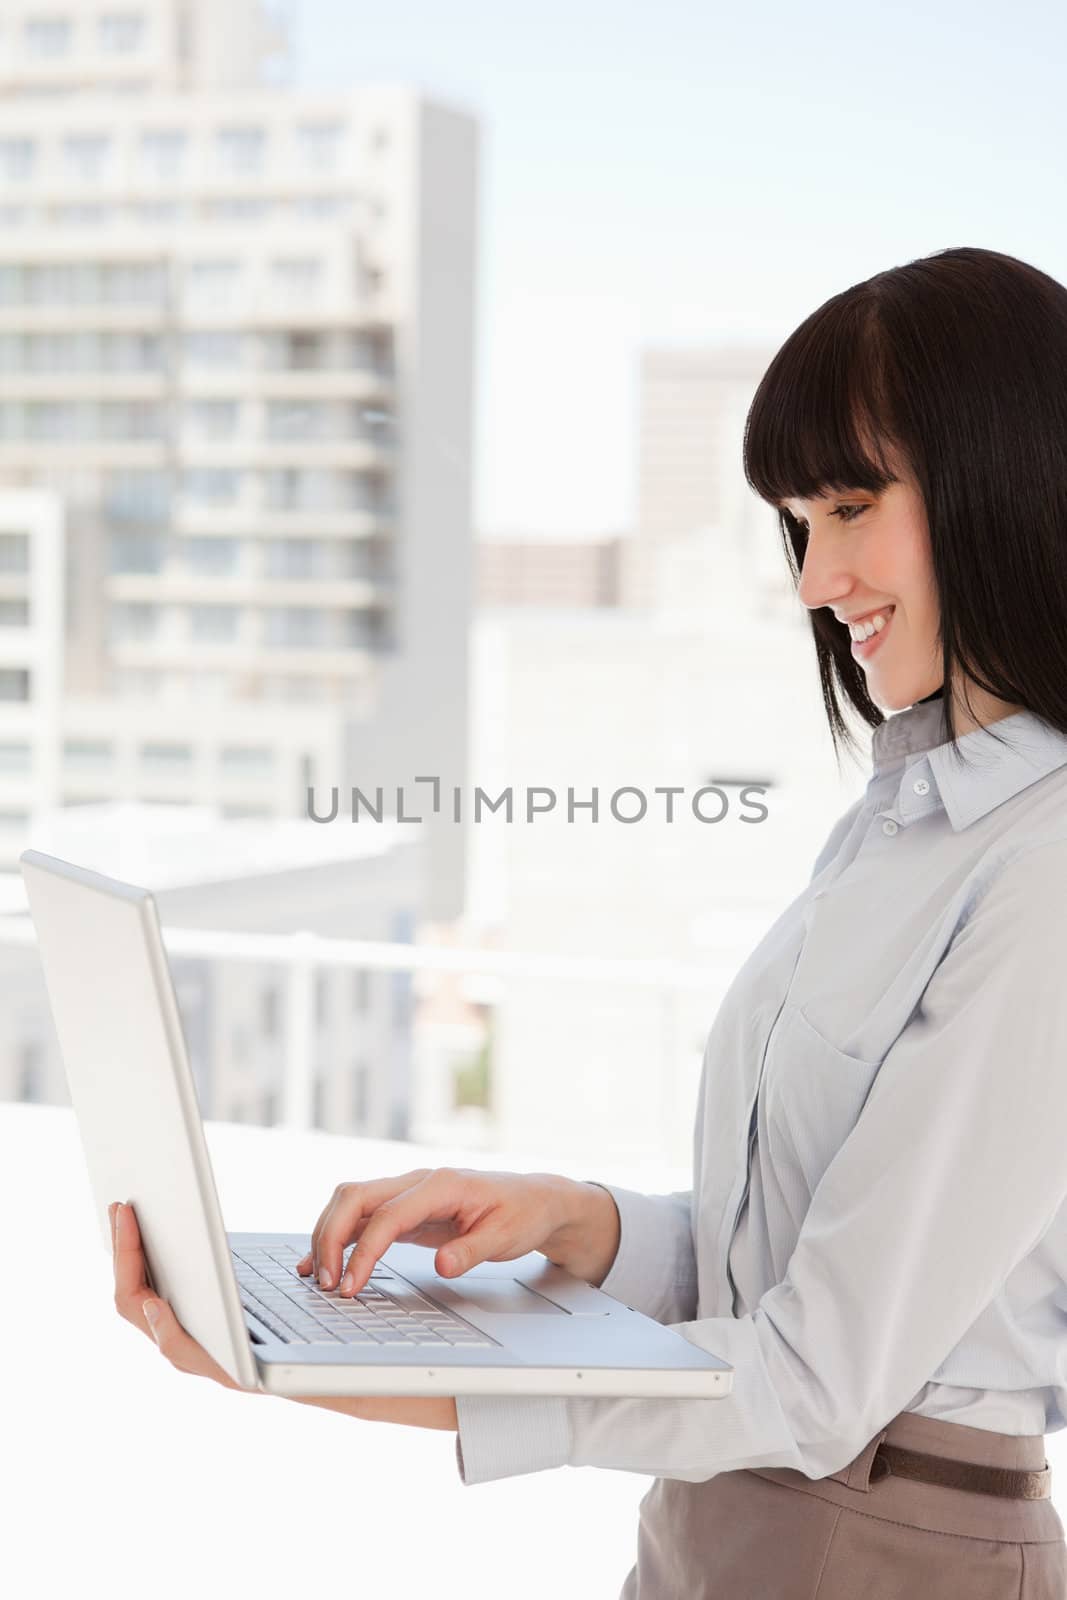 A woman smiling in work as she uses her laptop